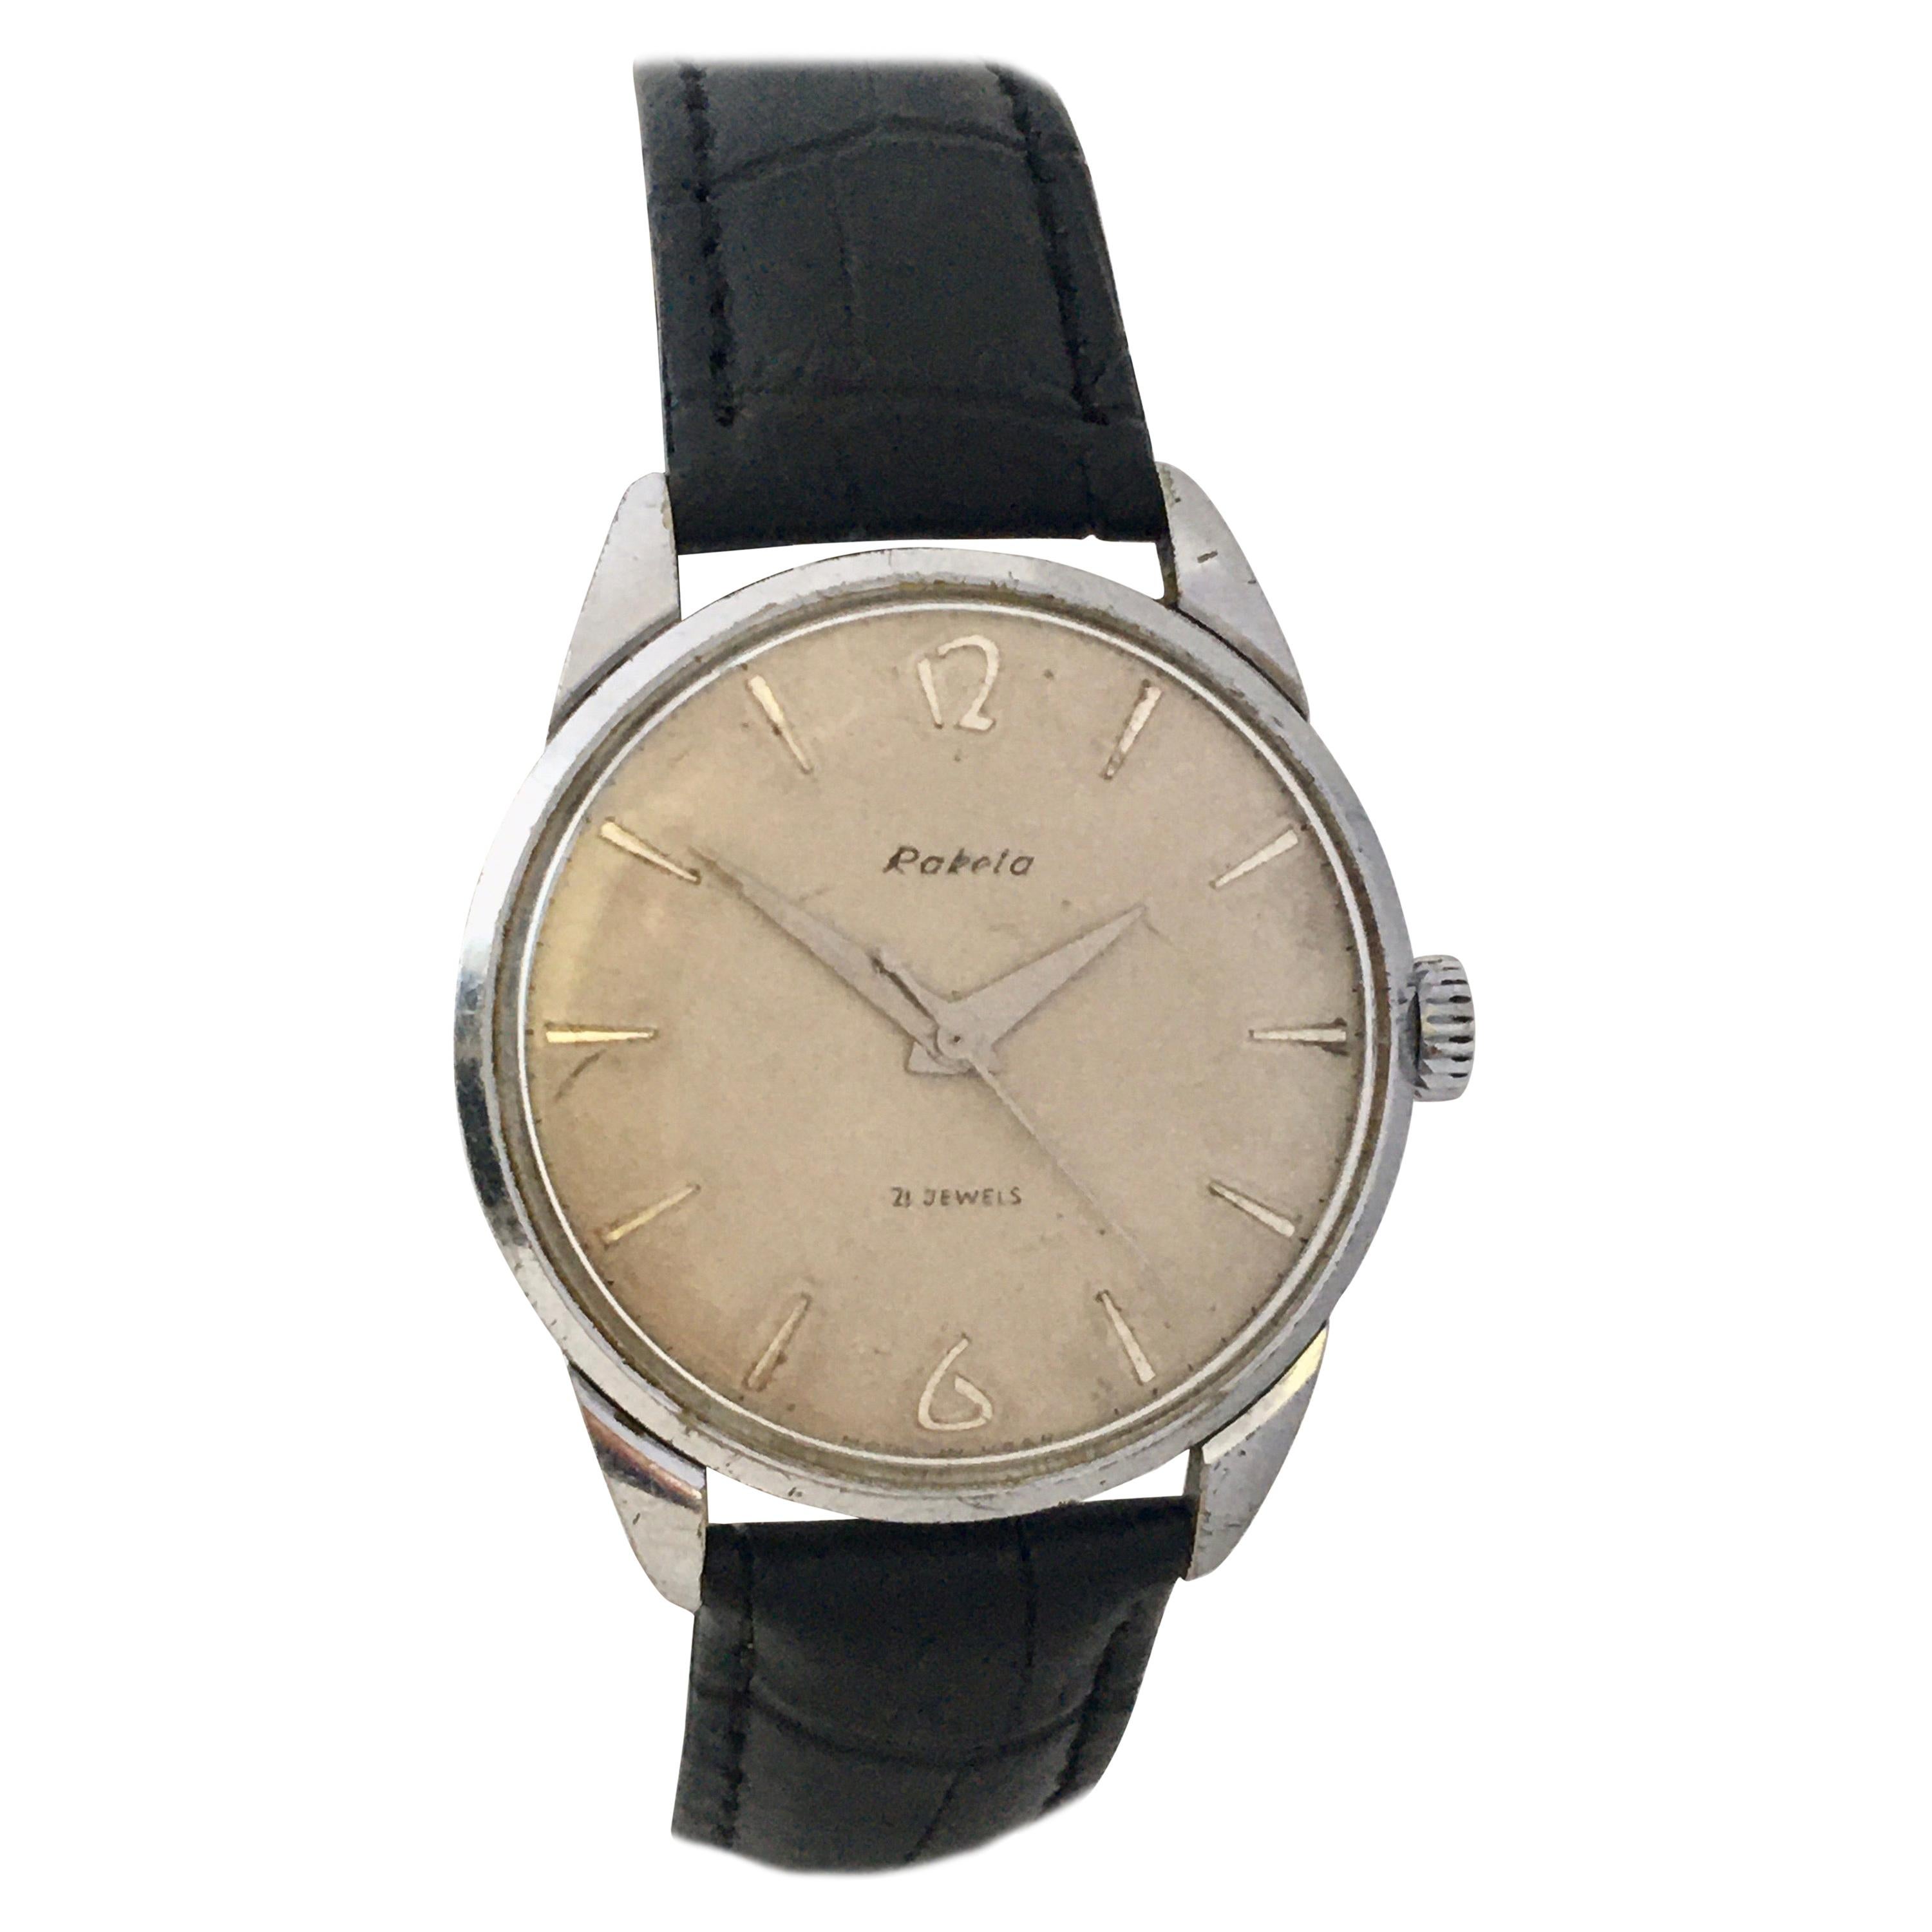 Vintage 1960s Russian Mechanical Watch For Sale